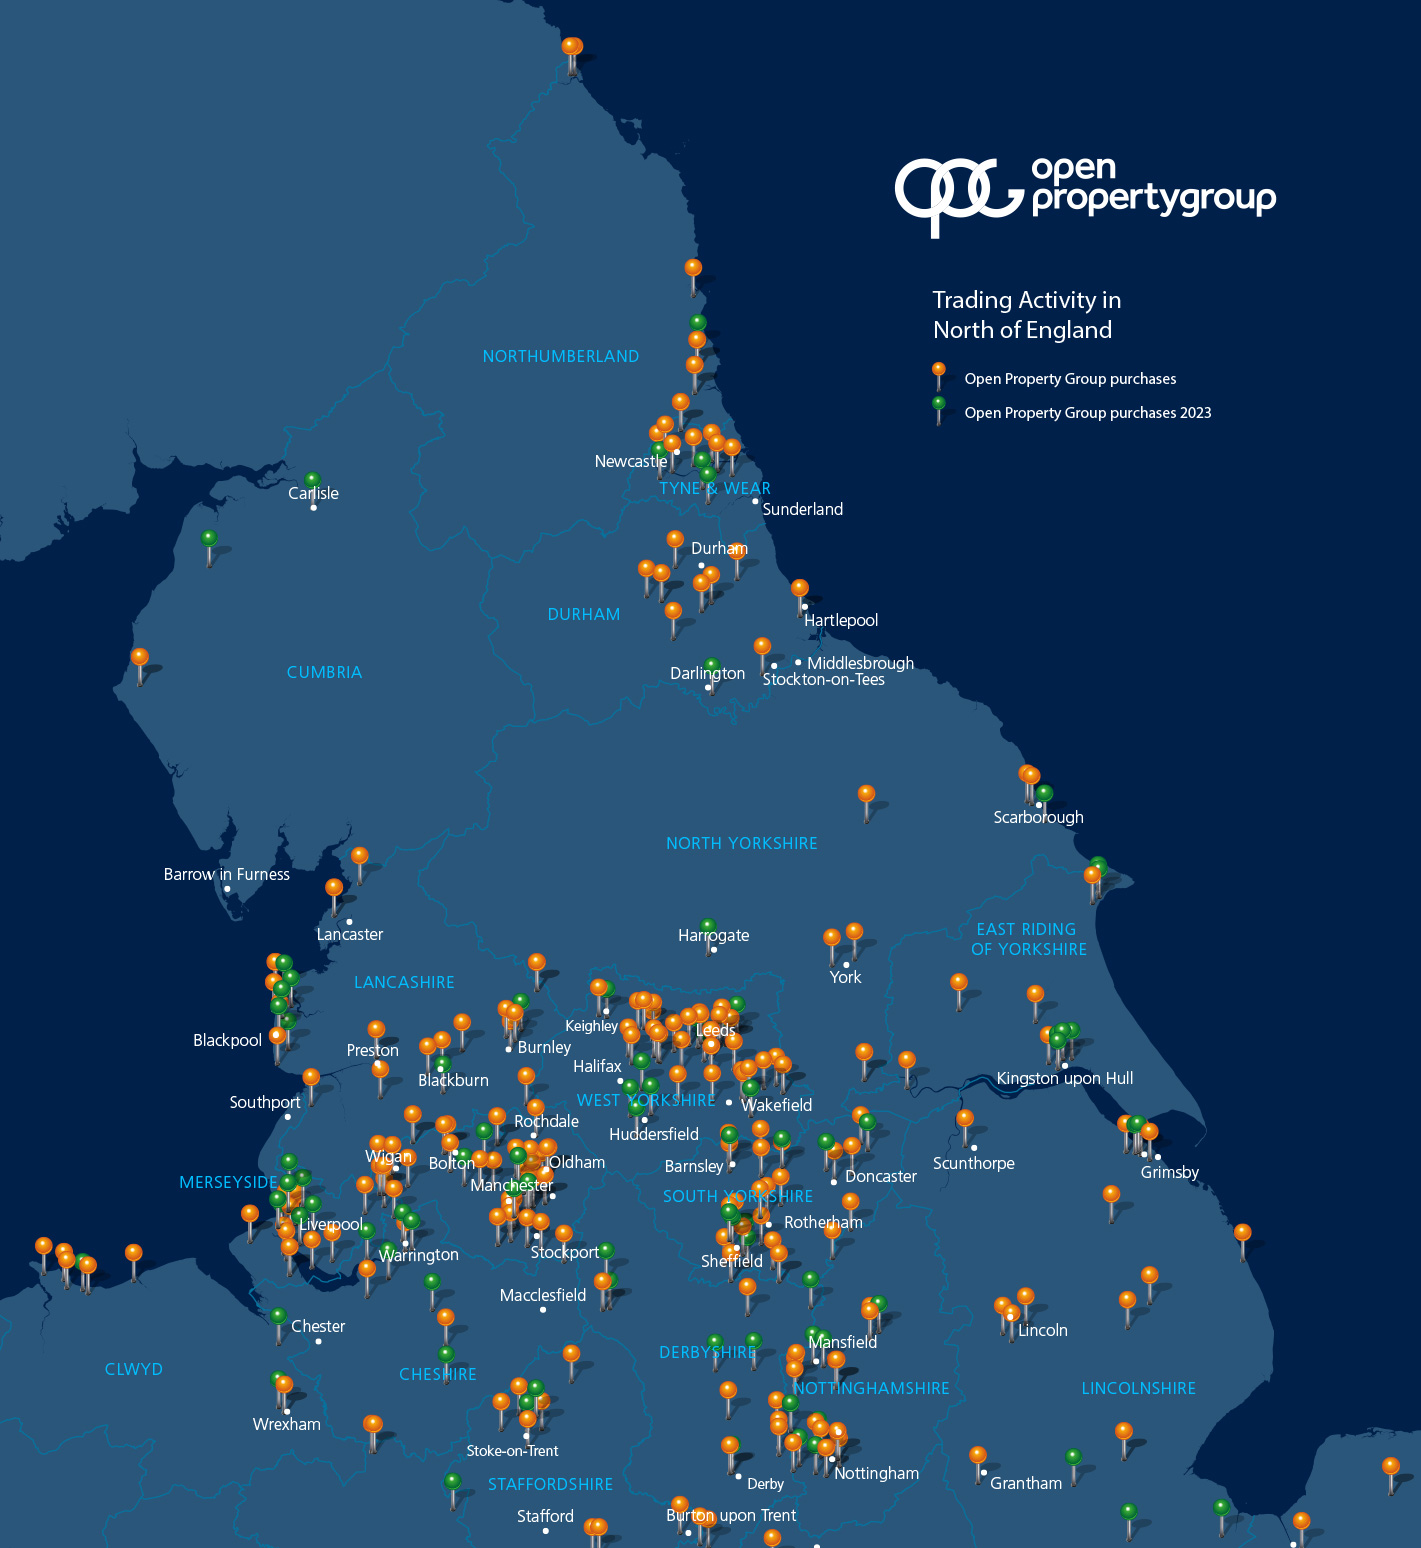 Map of Open Property Group’s properties in the north of the UK